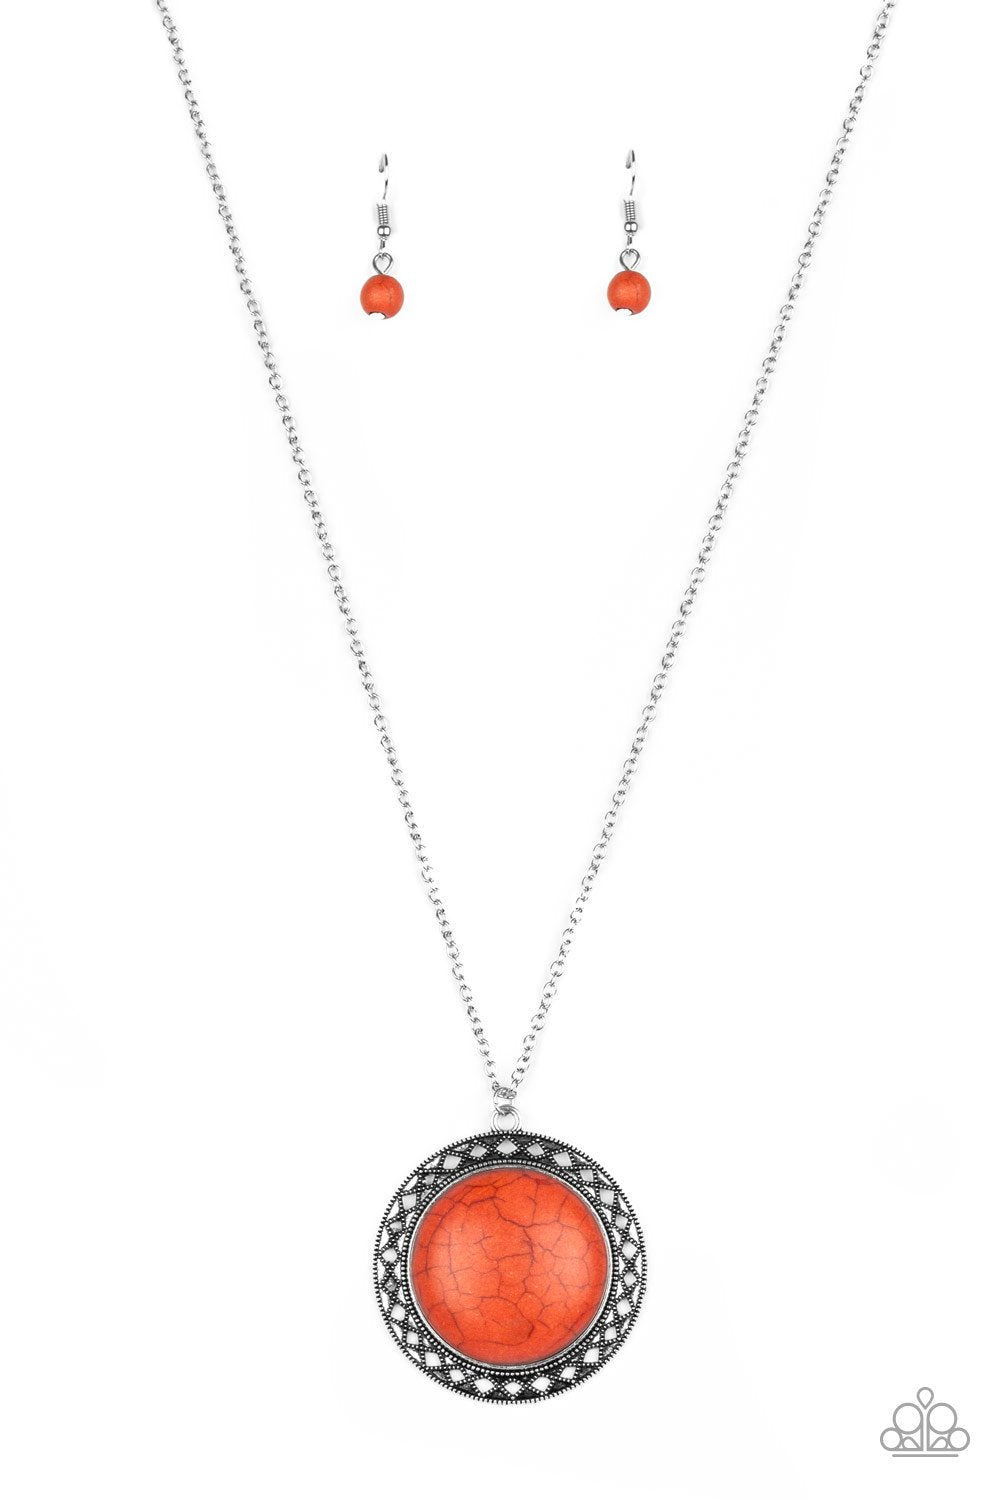 Paparazzi Necklace ~ Run Out Of RODEO - Orange